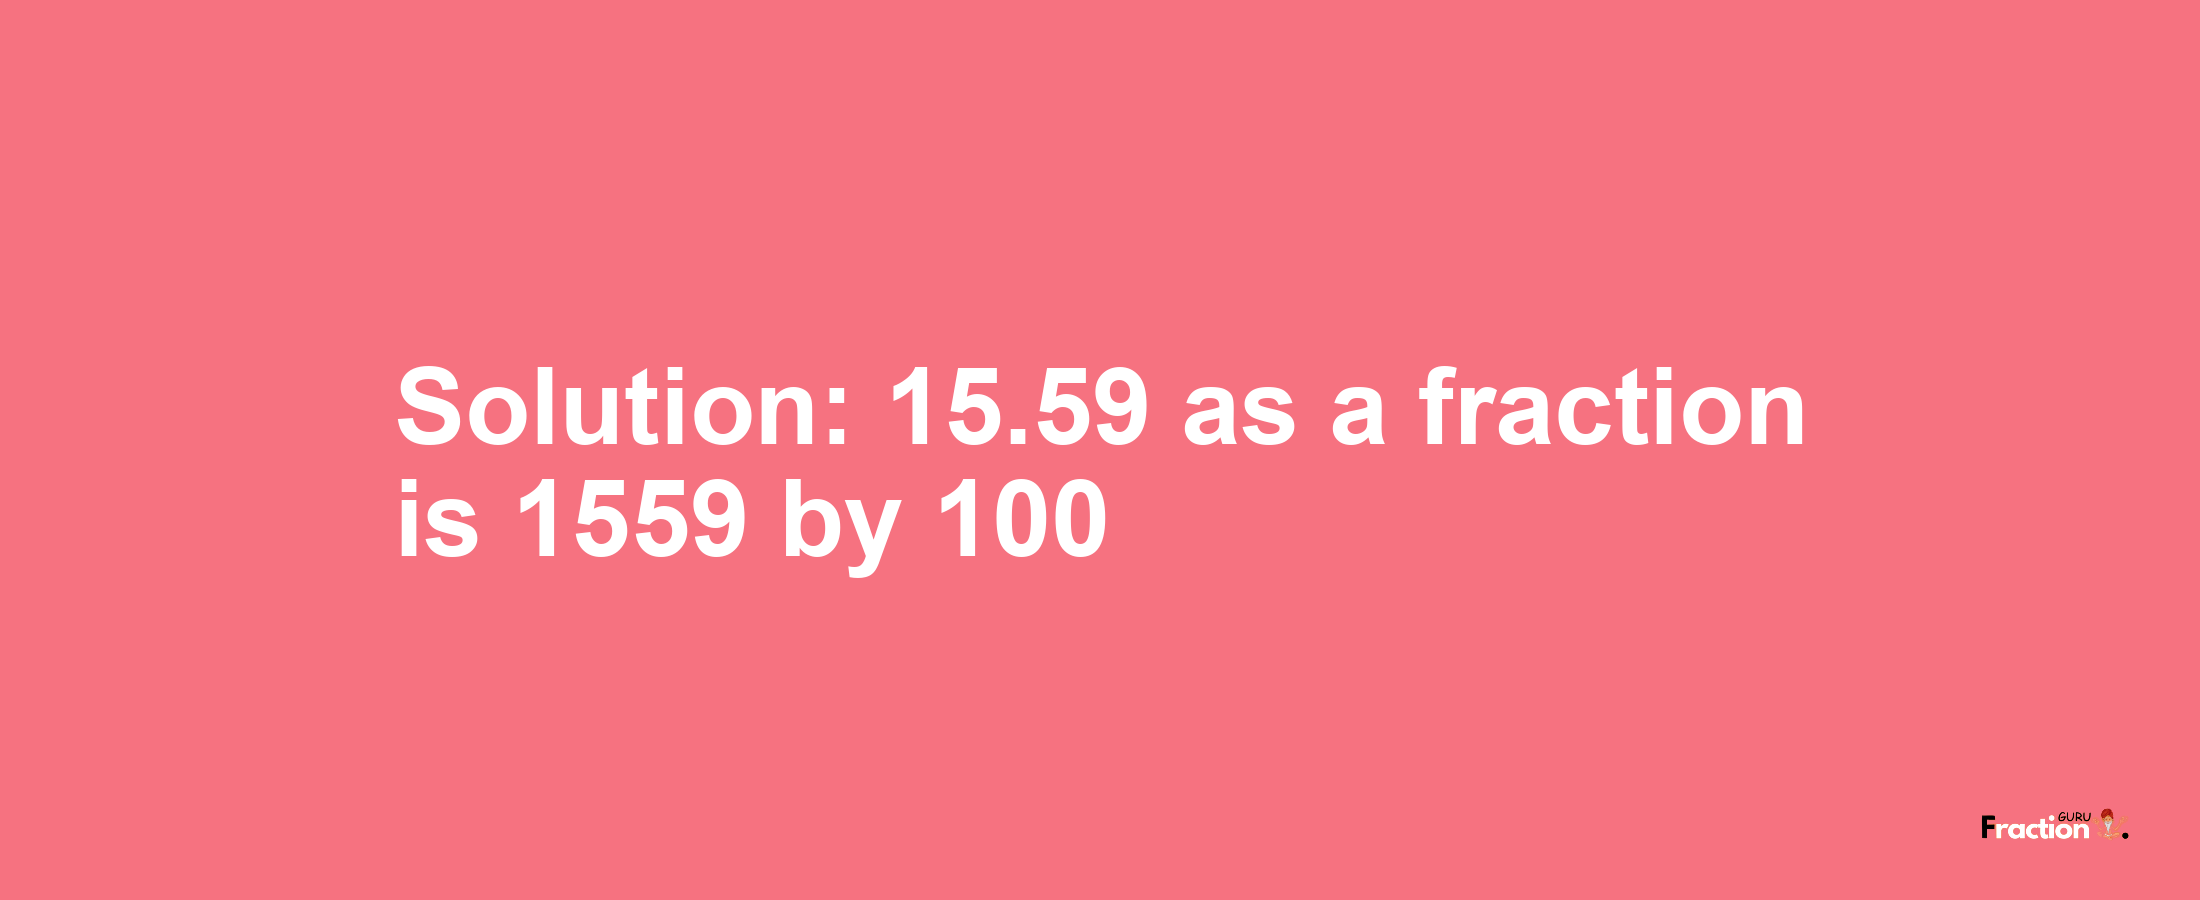 Solution:15.59 as a fraction is 1559/100